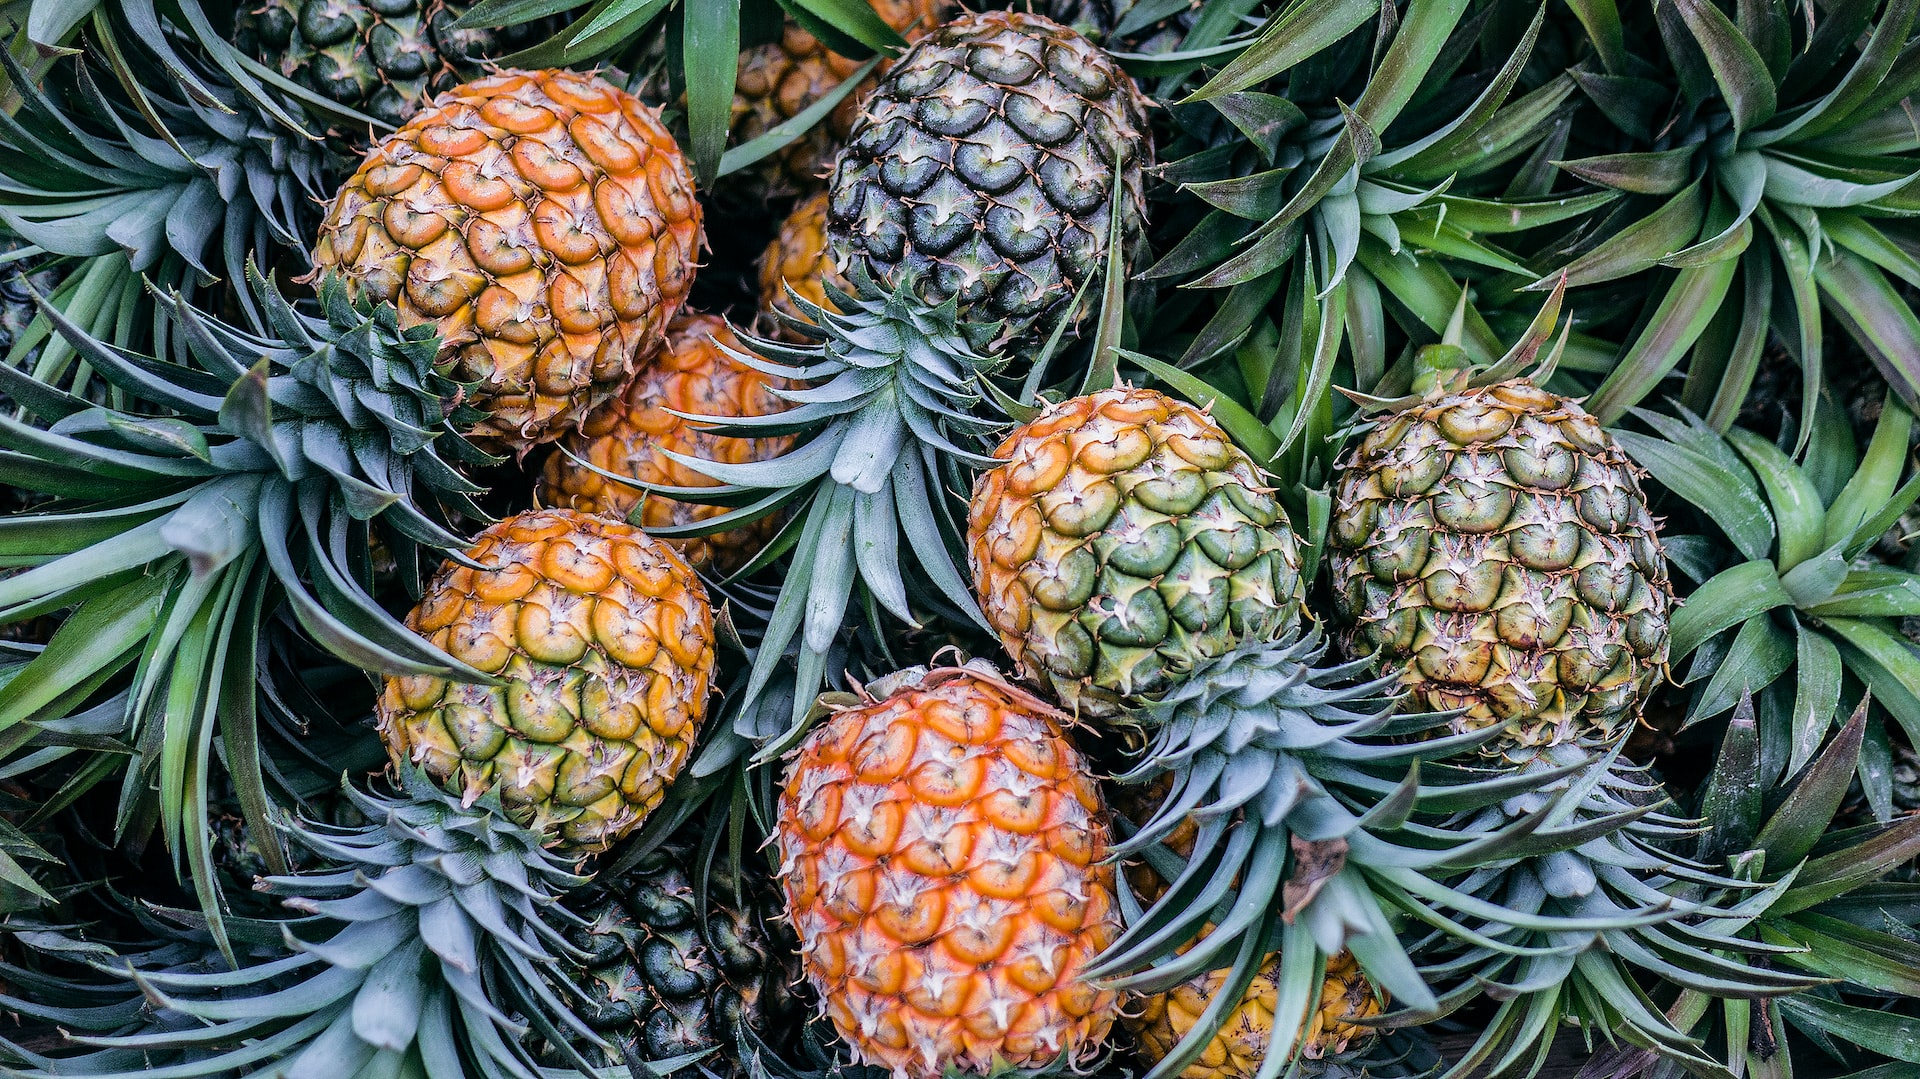 Pineapple Perfection: Discover the History, Health Benefits, and Uses of This Tropical Fruit